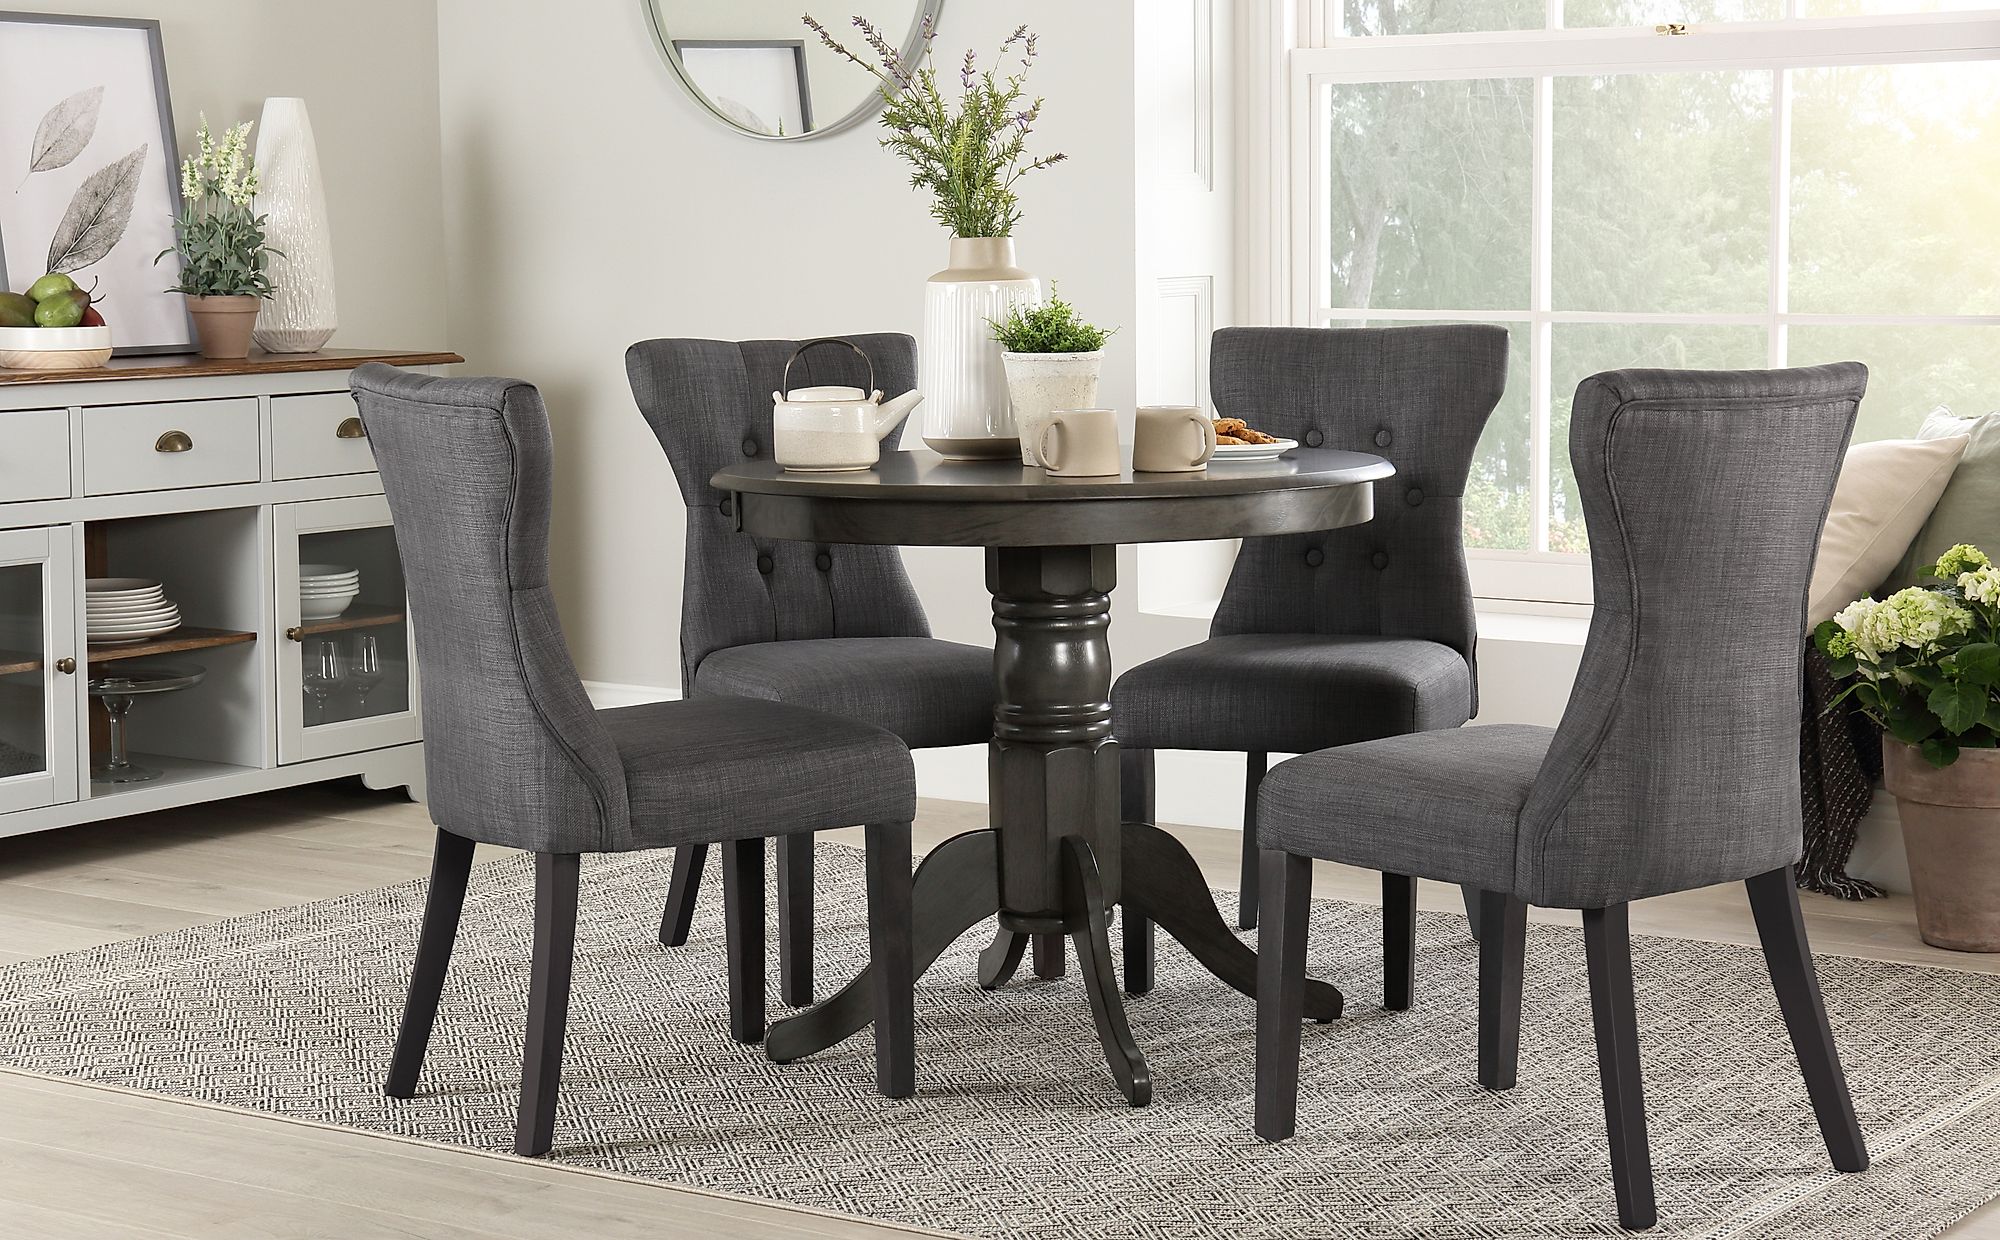 Round Grey Dining Room Tables And Chairs